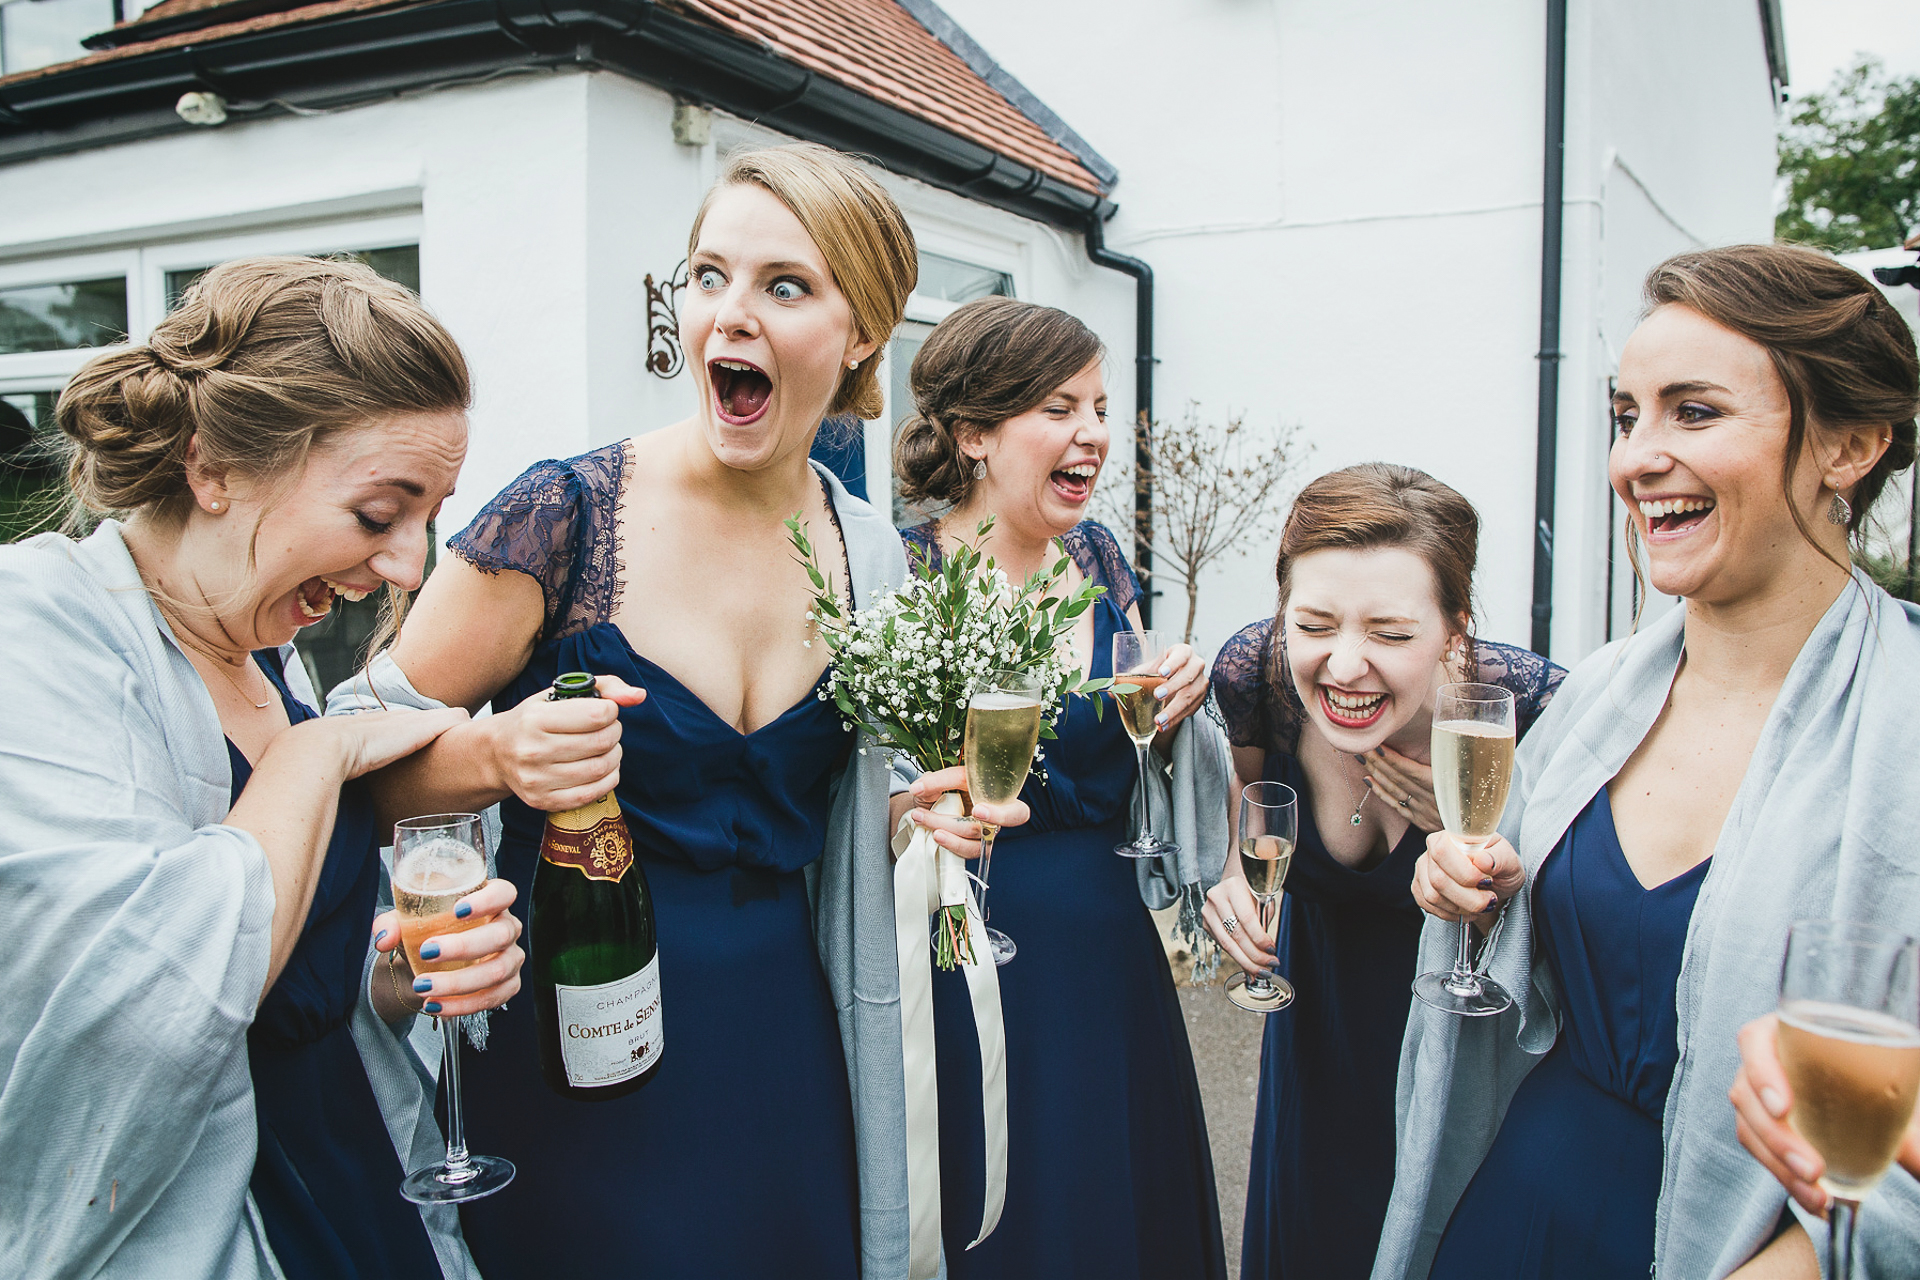 Group of bridesmaids laughing together with champagne